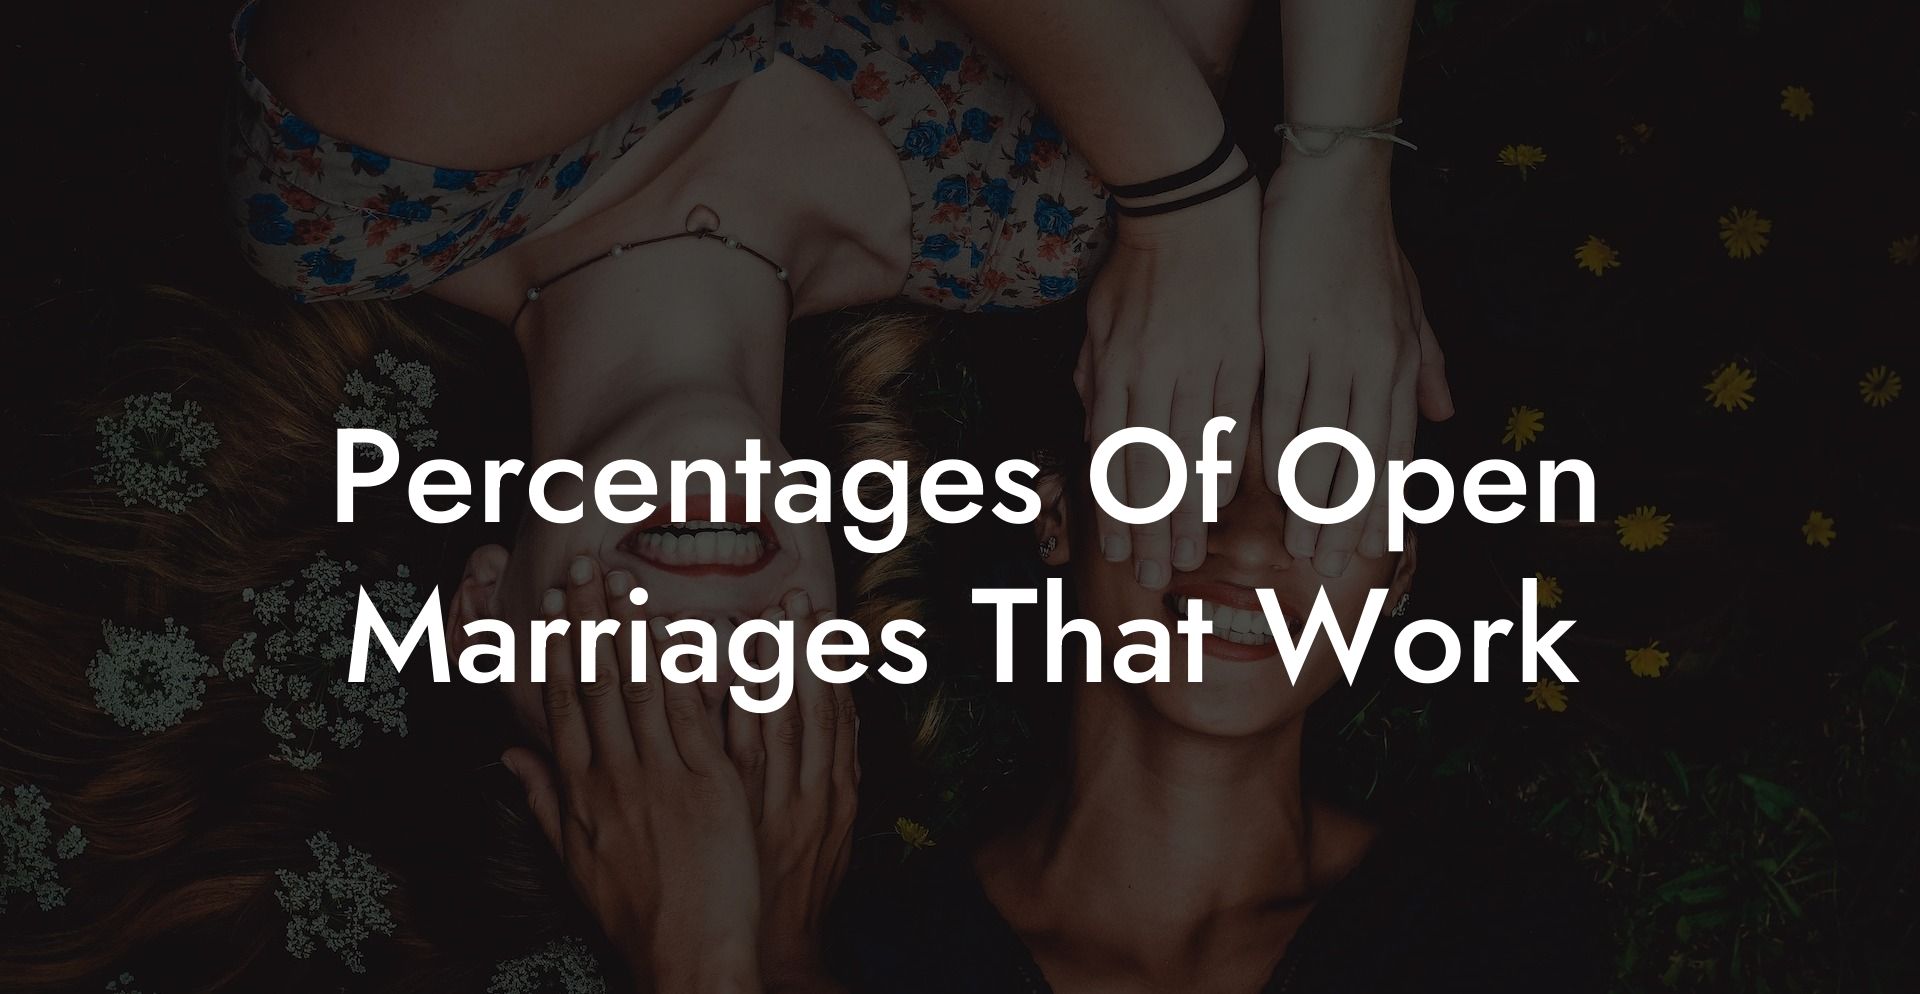 Percentages Of Open Marriages That Work